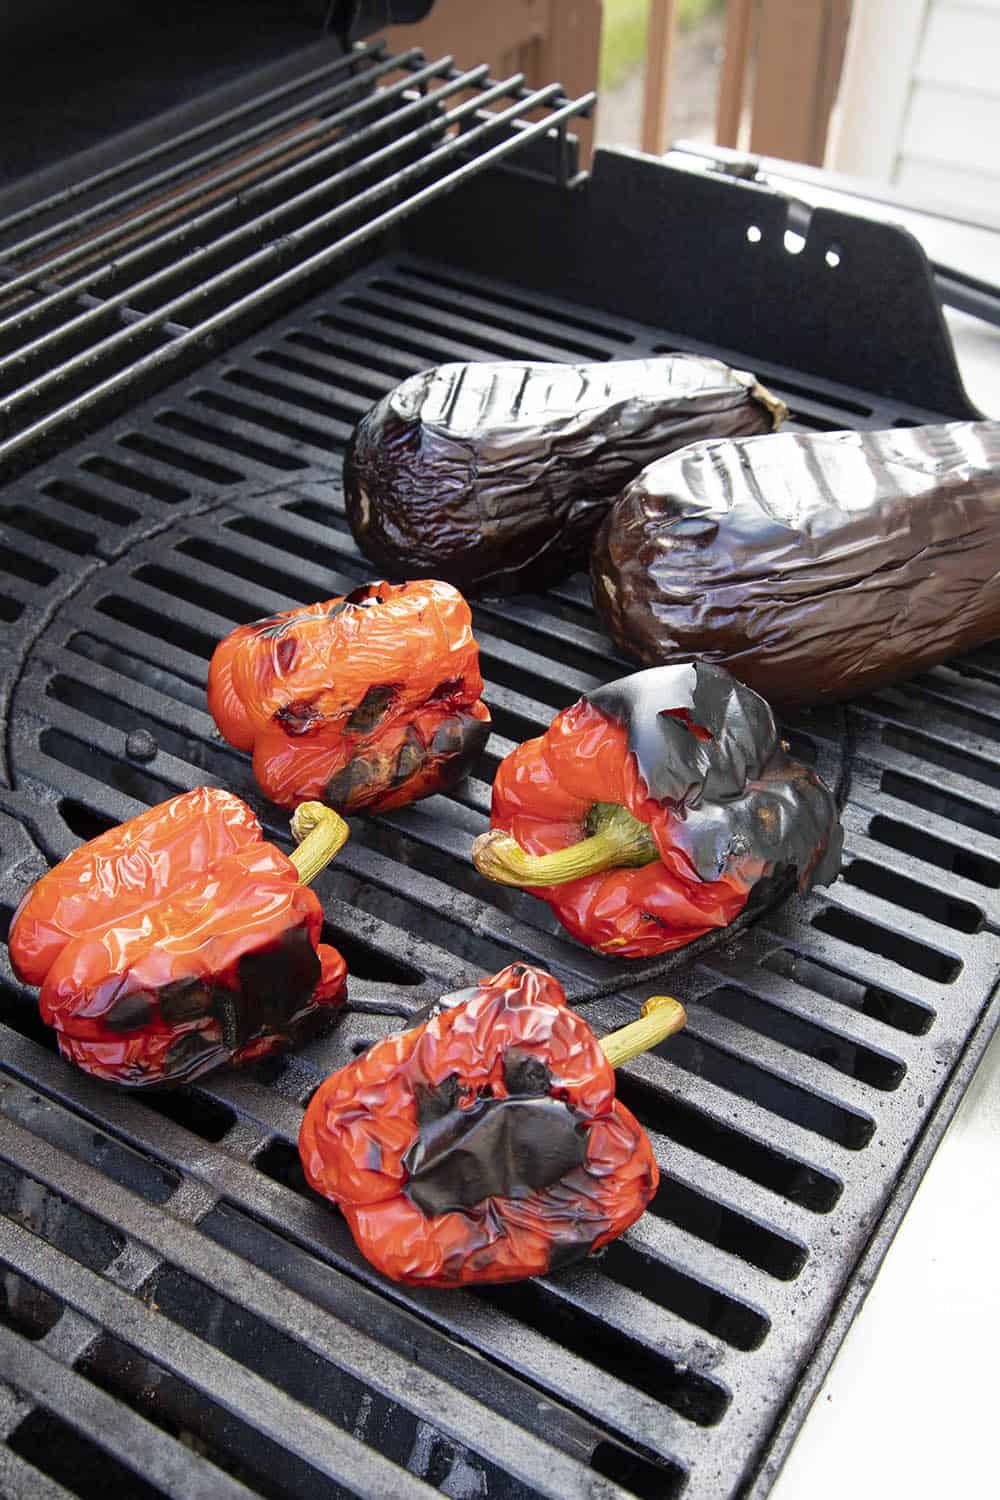 Roasted red peppers and eggplants on the grill